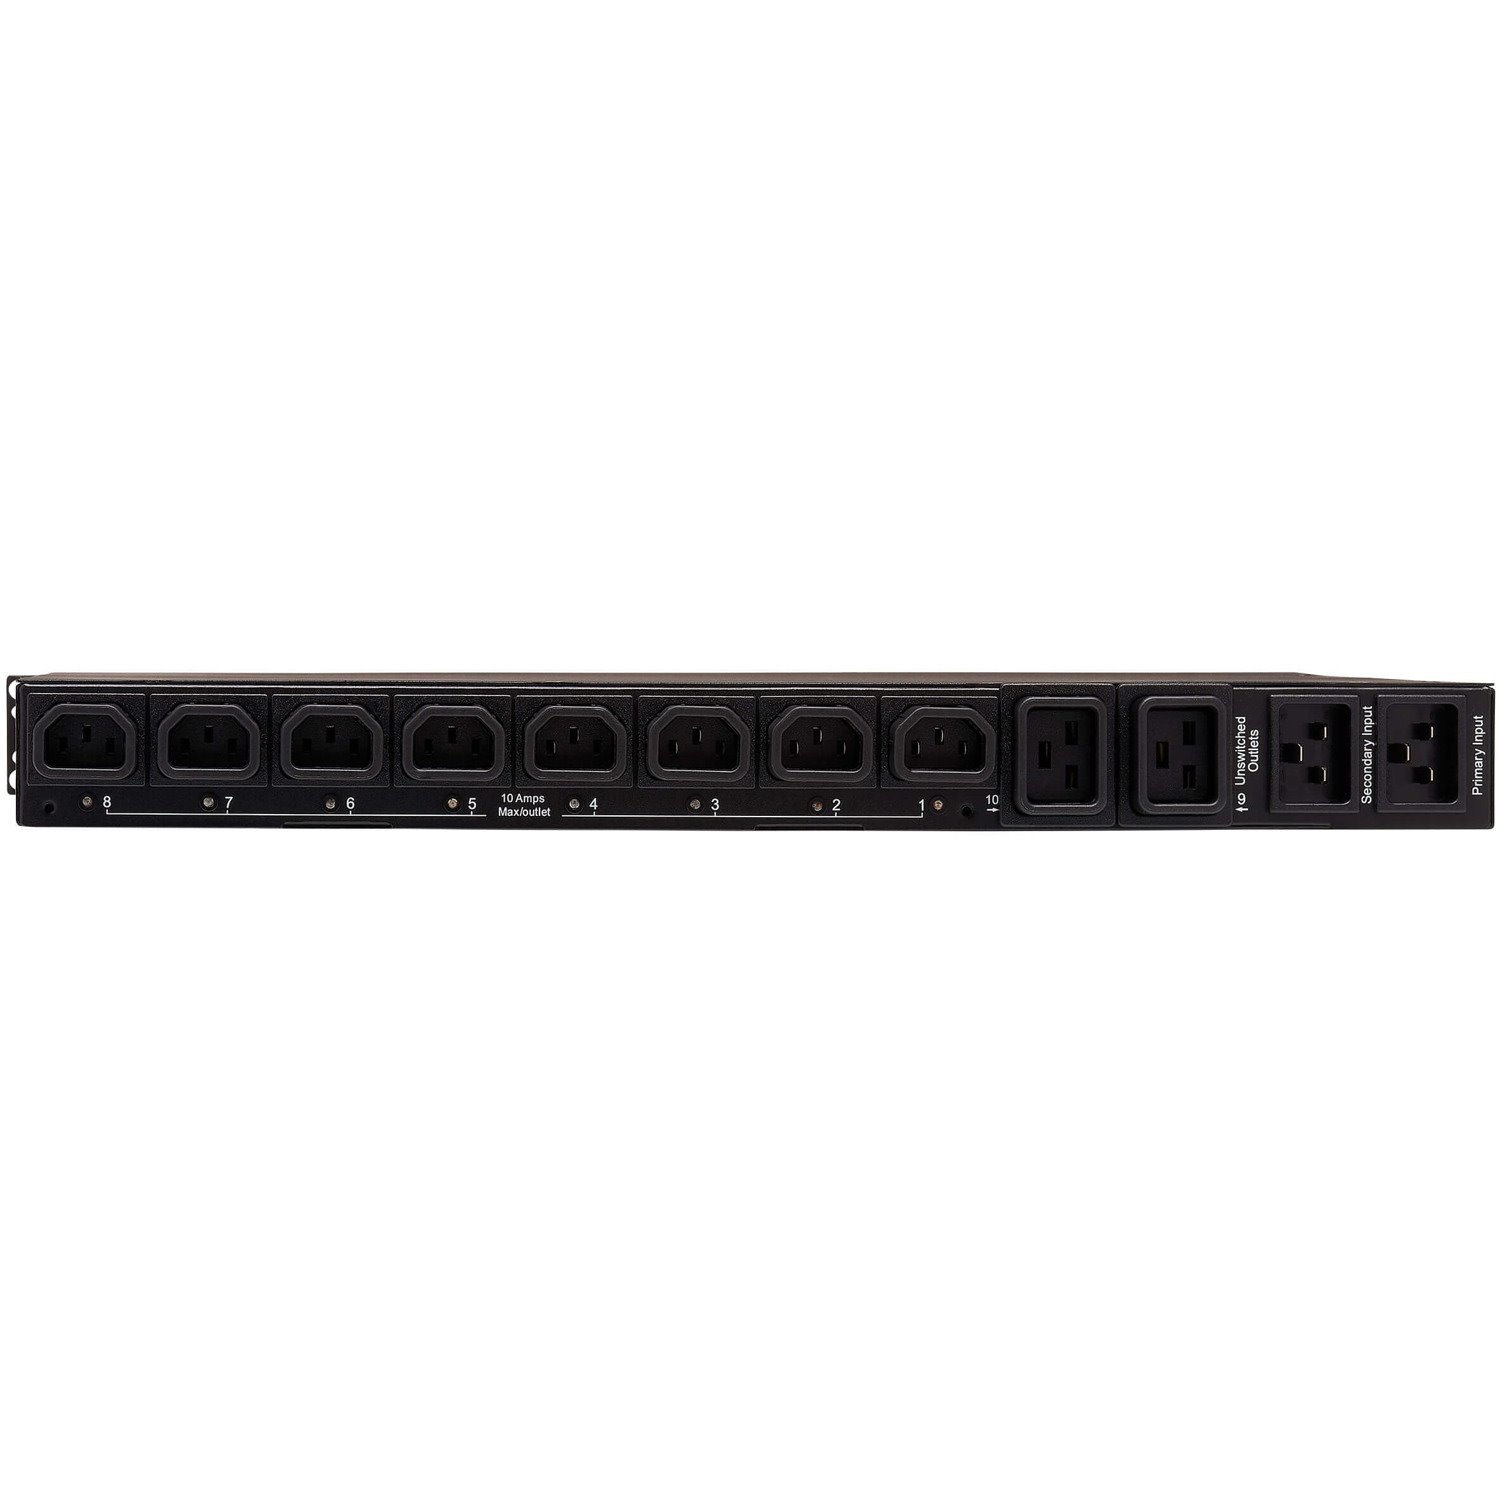 Tripp Lite by Eaton 3.8kW Single-Phase Switched Automatic Transfer Switch PDU, Two 200-240V C20 Inlets, 8 C13 & 2 C19 Outputs, 1U, TAA